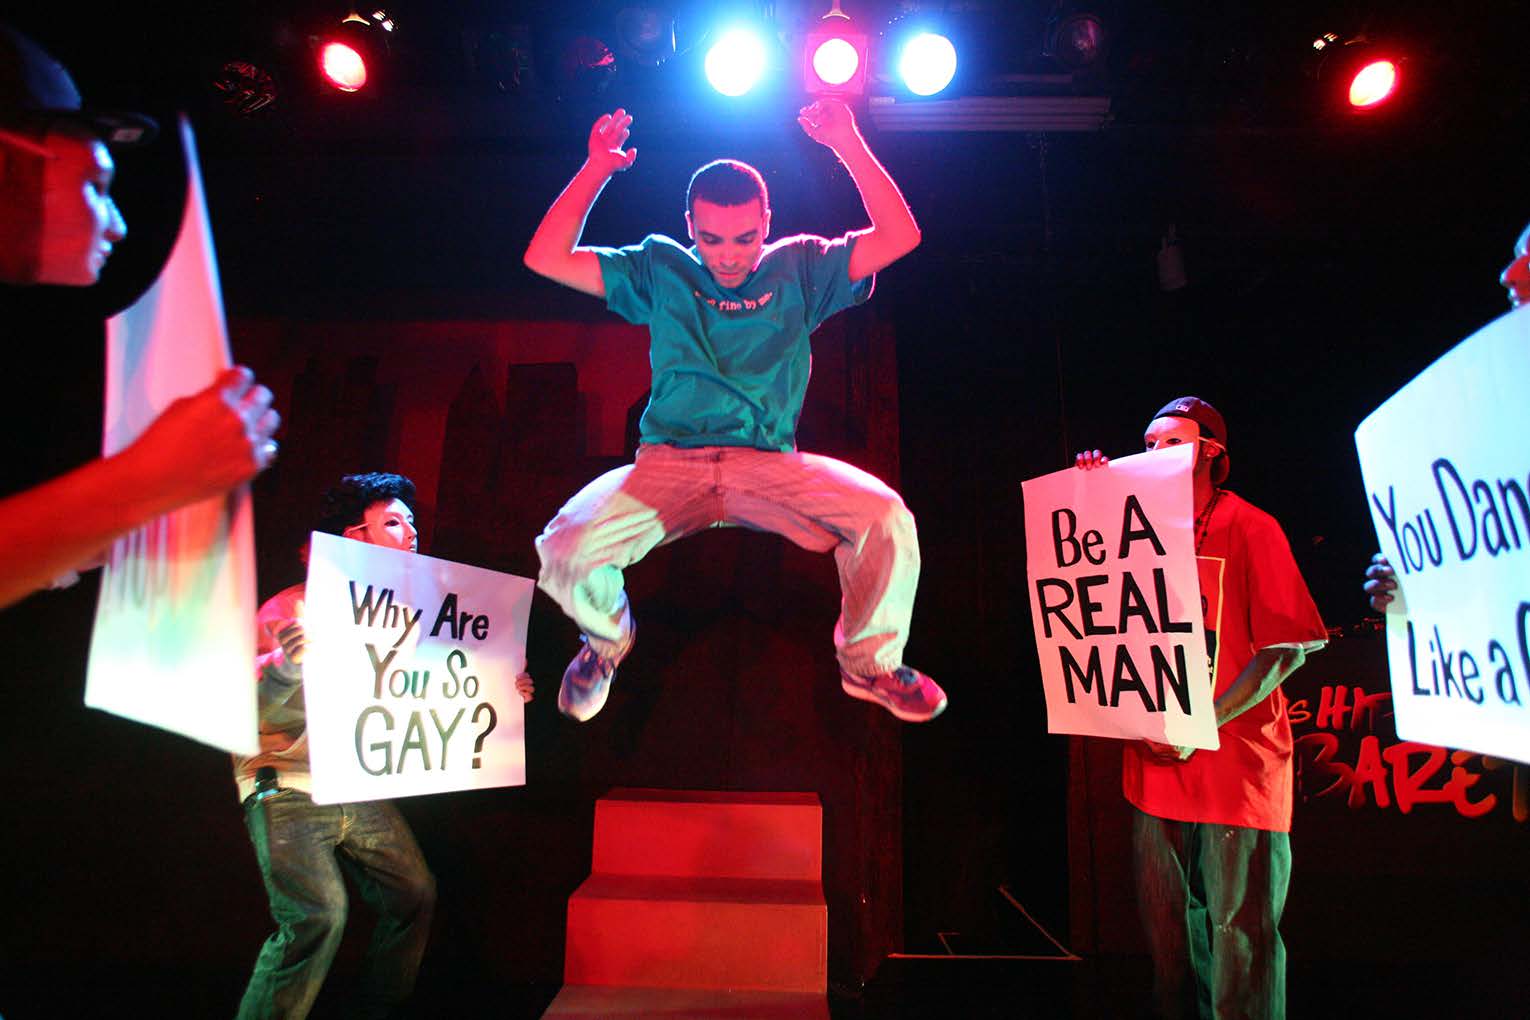  (Facing page) Jesse Vega (center) with ensemble in the All Stars Hip-Hop Cabaret #7, a devised production directed by Dan Friedman and Antoine Joyce at the Castillo Theatre, August 2009. (Photo by Ronald L. Glassman) 